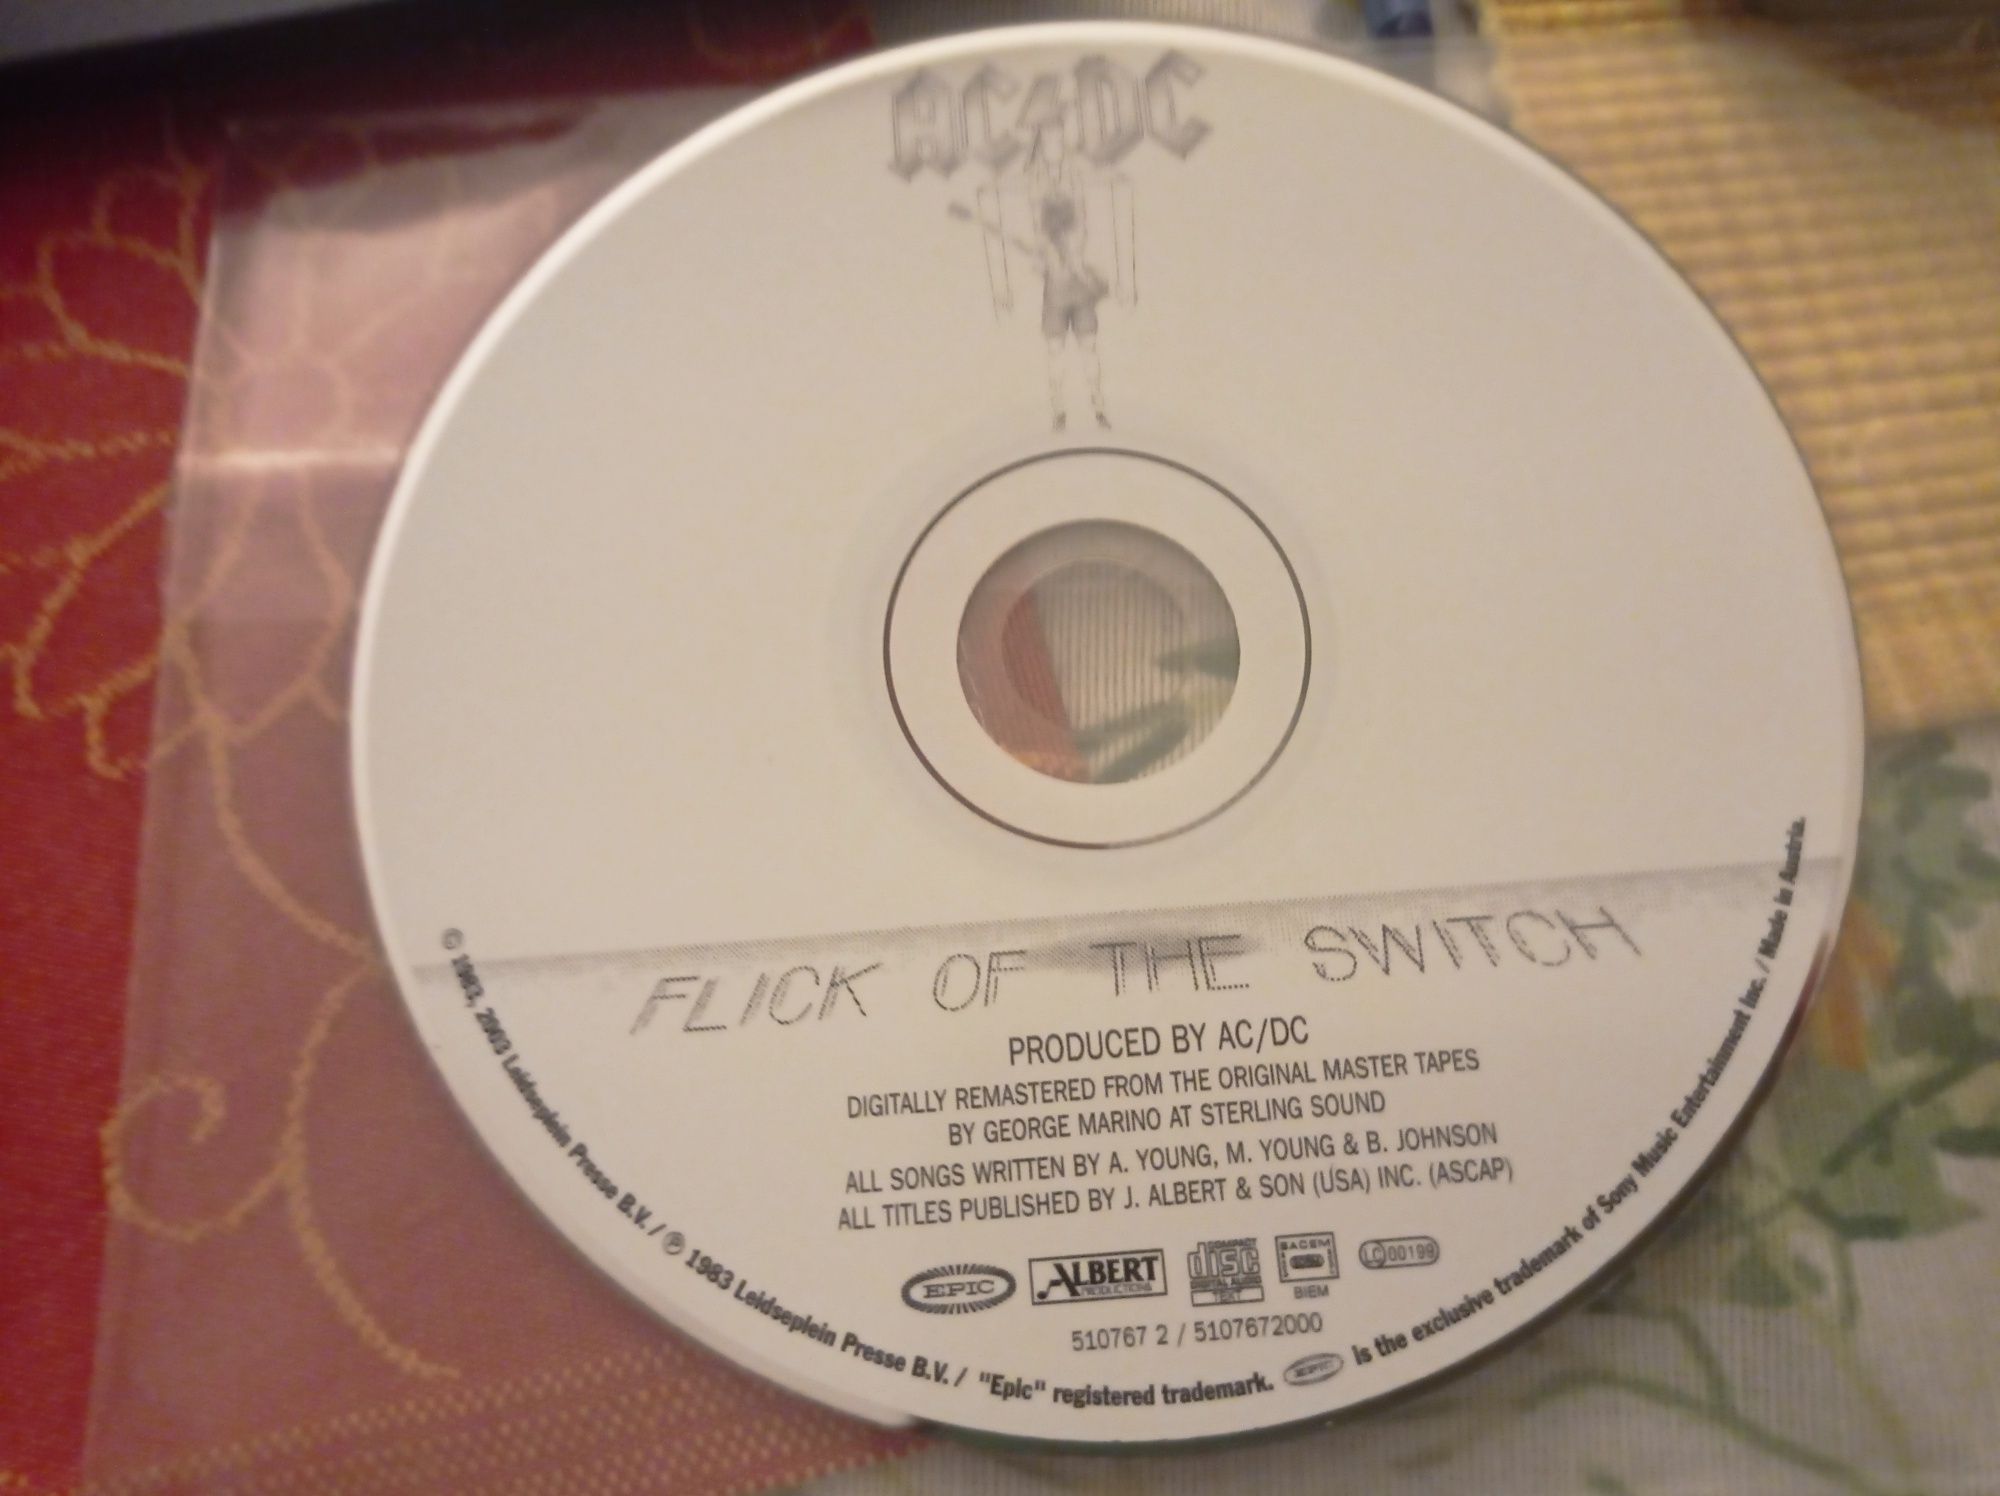 AC/DC - Flick of The switch